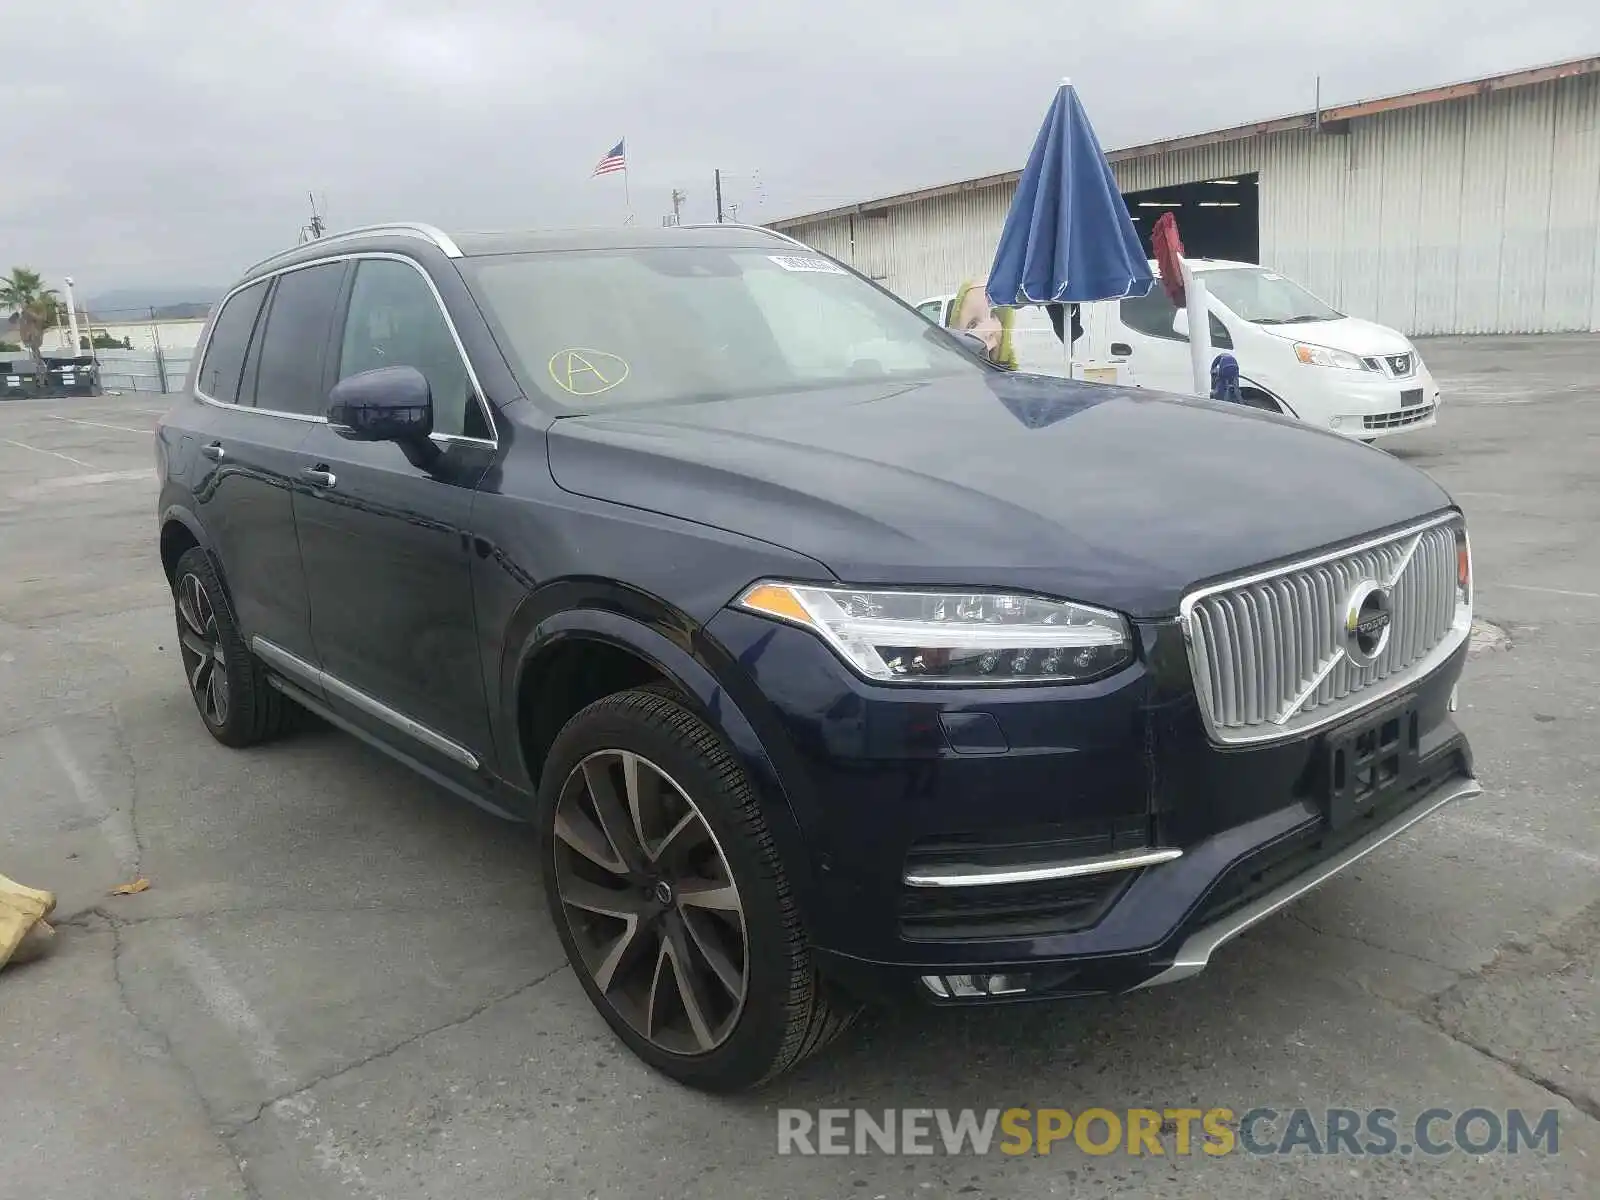 1 Photograph of a damaged car YV4A22PLXK1474753 VOLVO XC90 T6 IN 2019